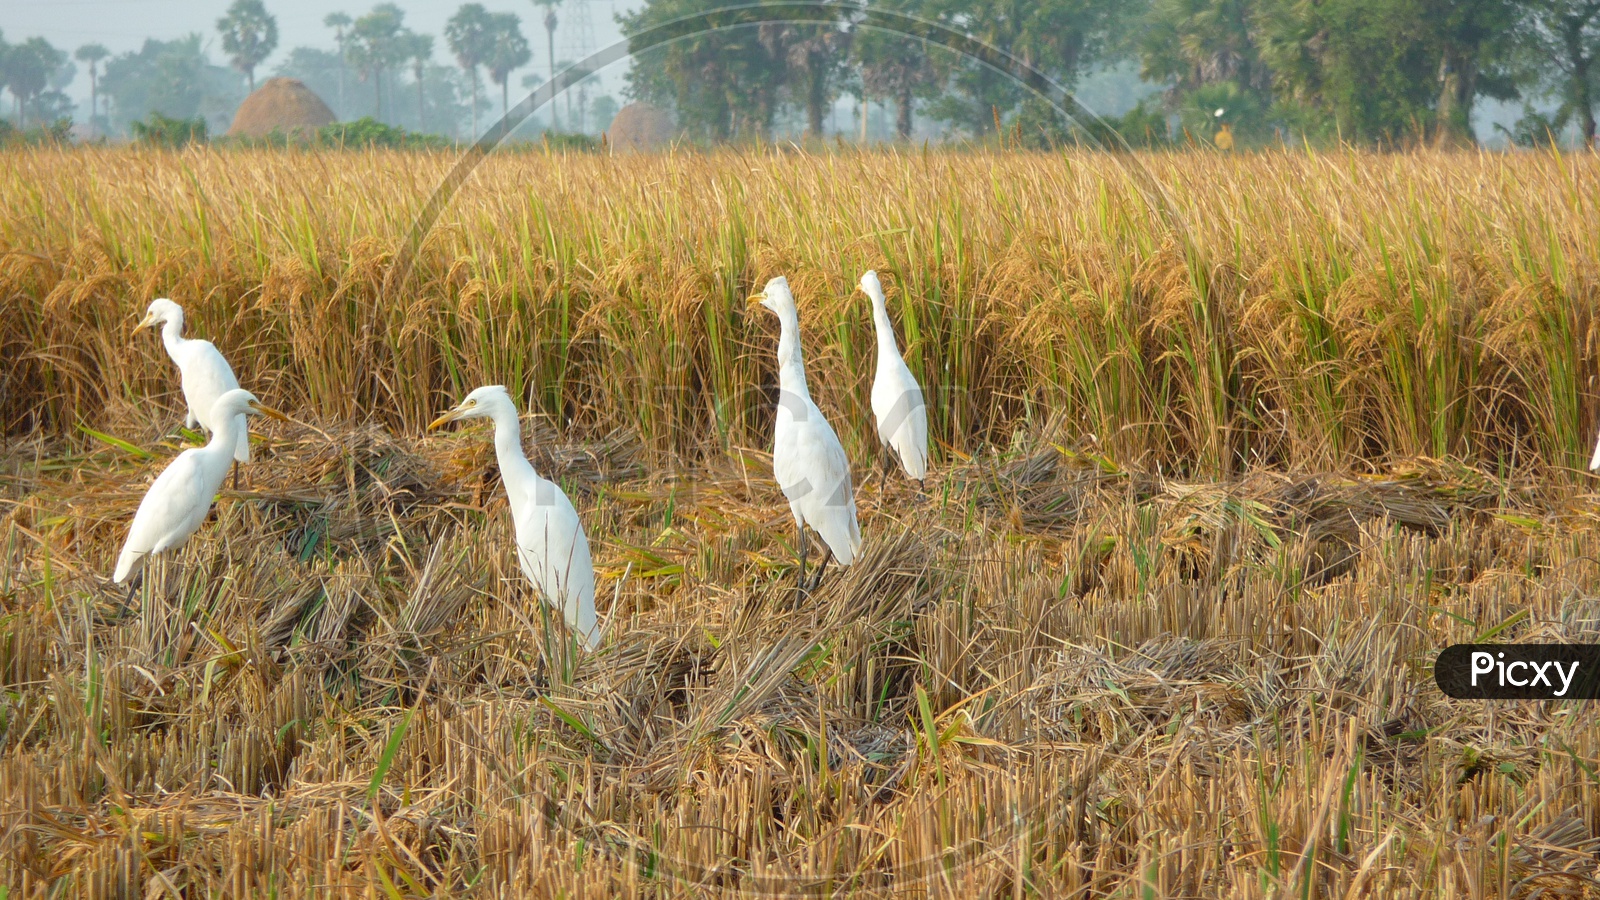 Cranes in Agriculture Fields